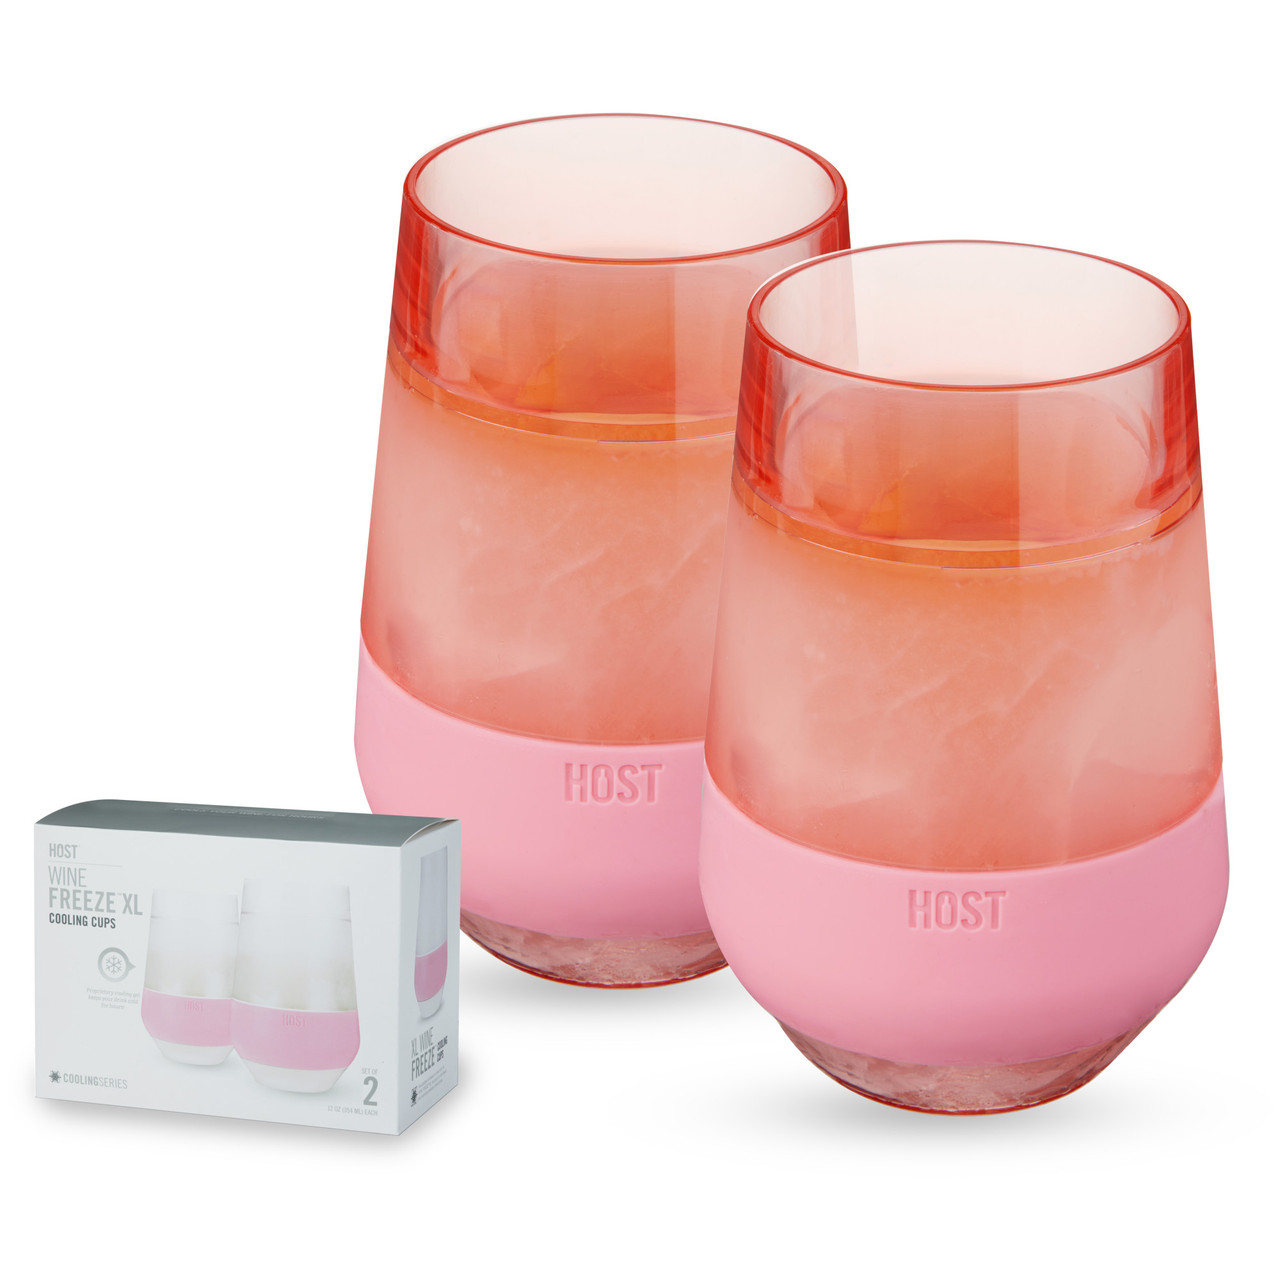 https://cdn11.bigcommerce.com/s-oo0gdojvjo/images/stencil/1280x1280/products/68869/101011/wine-freeze-xl-in-blush-tint-wine-glasses-by-host-set-of-2__75755.1683777579.jpg?c=2&imbypass=on